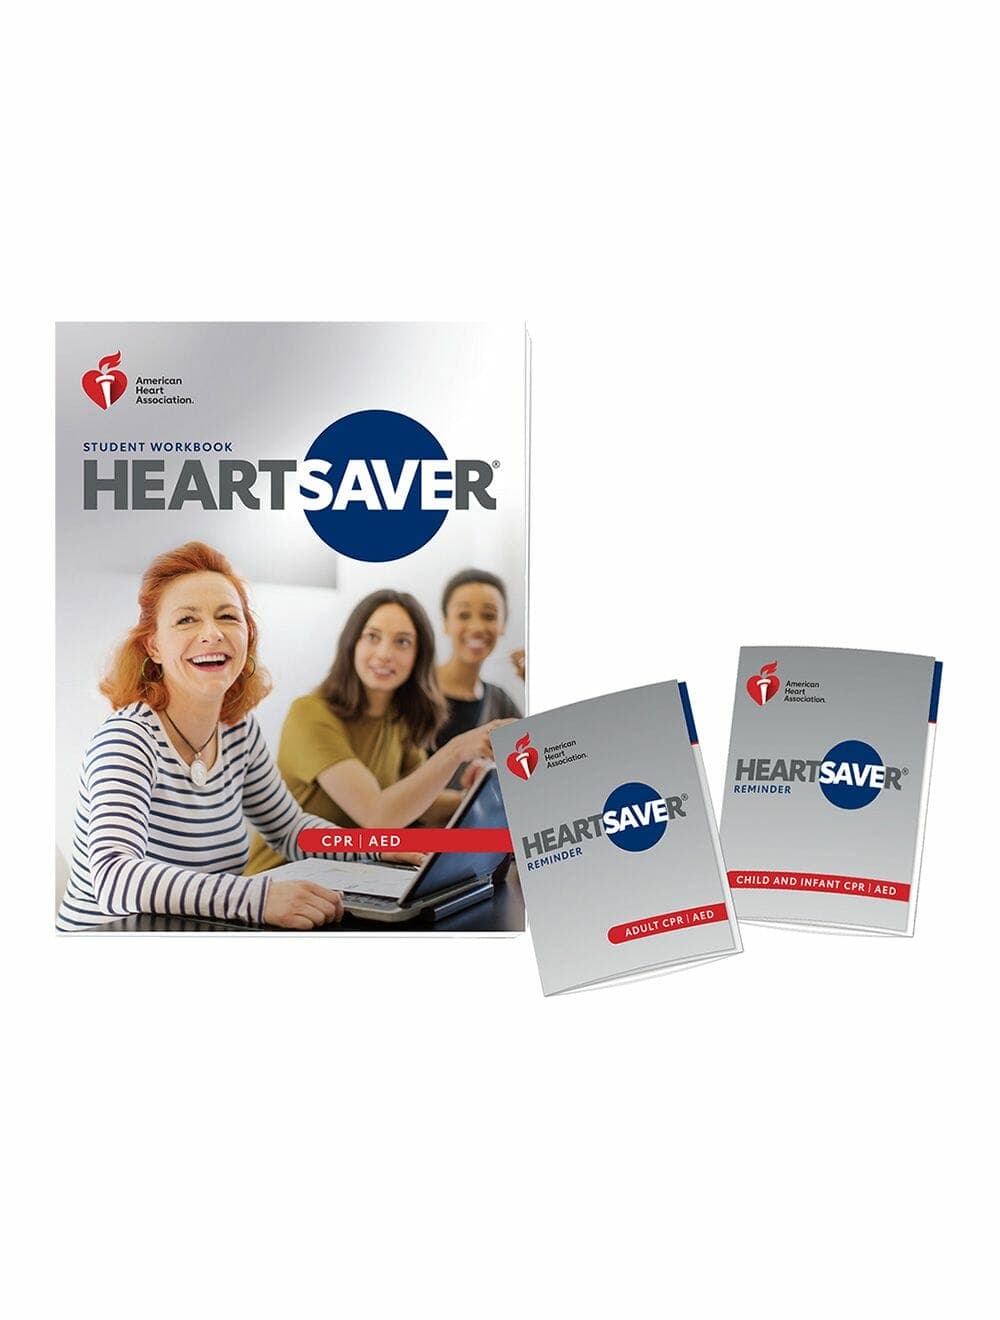 2020 AHA Heartsaver® CPR AED Student Workbook